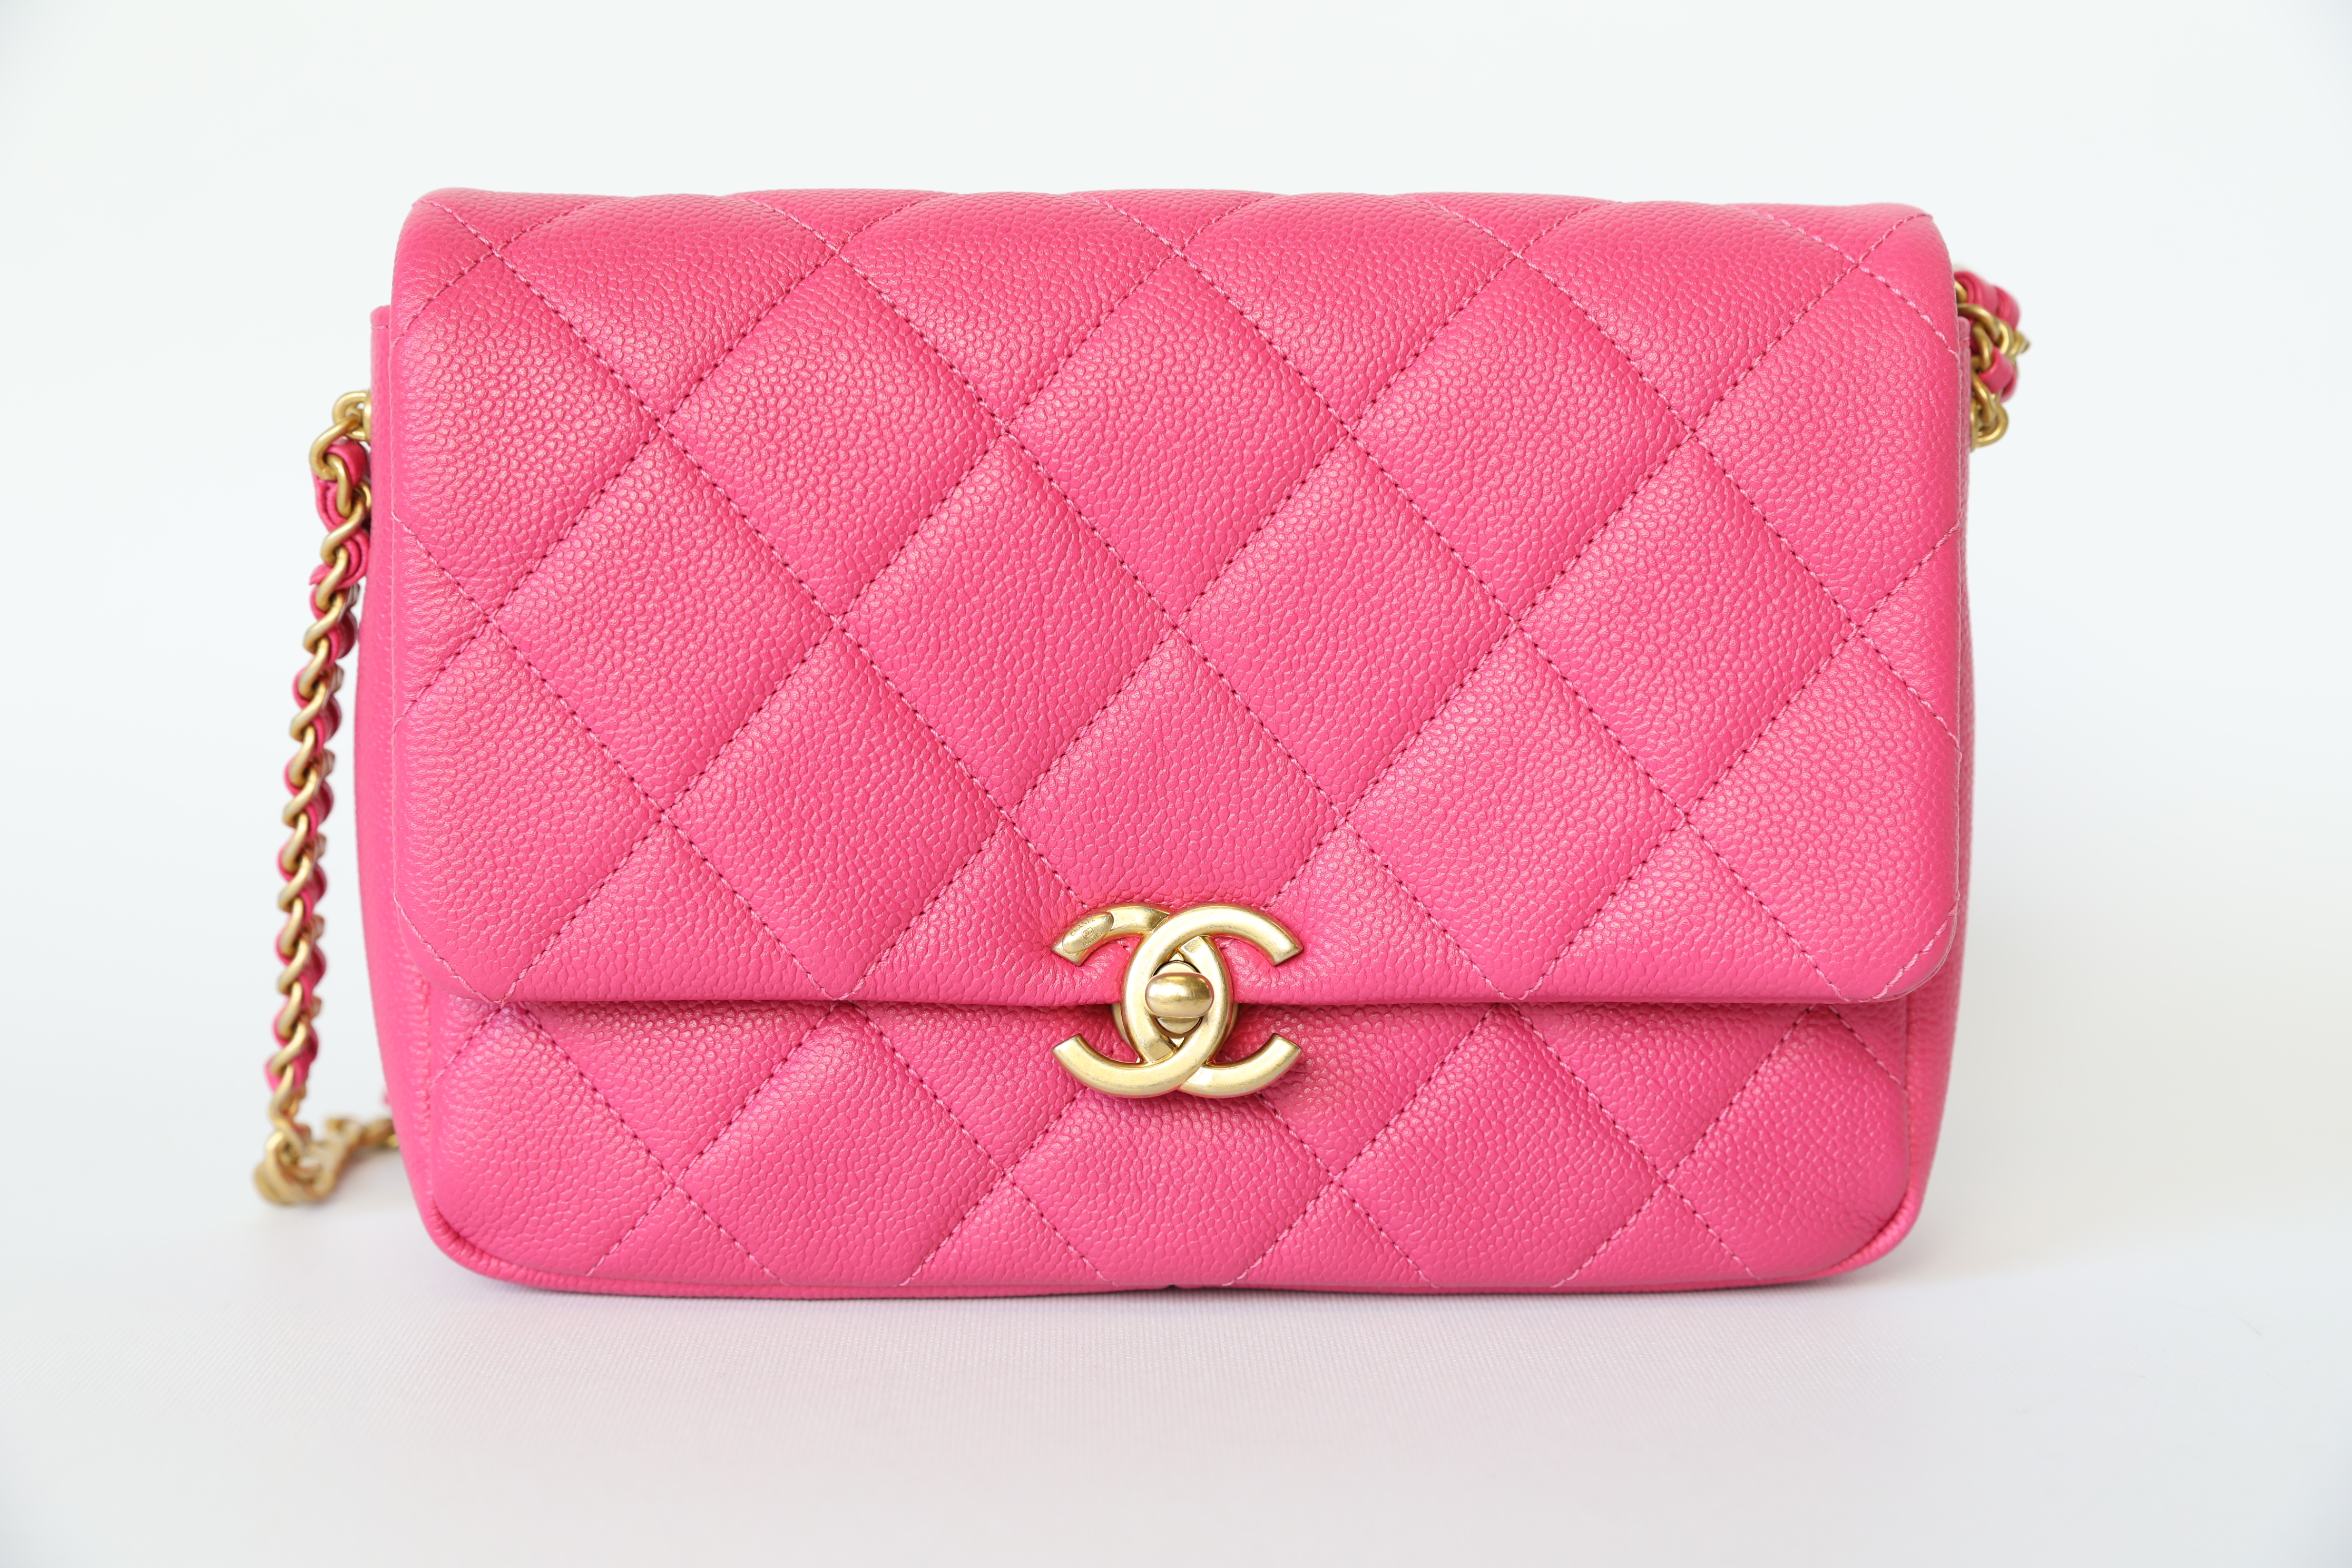 Chanel Melody Flap, Bright Pink Caviar with Gold Hardware